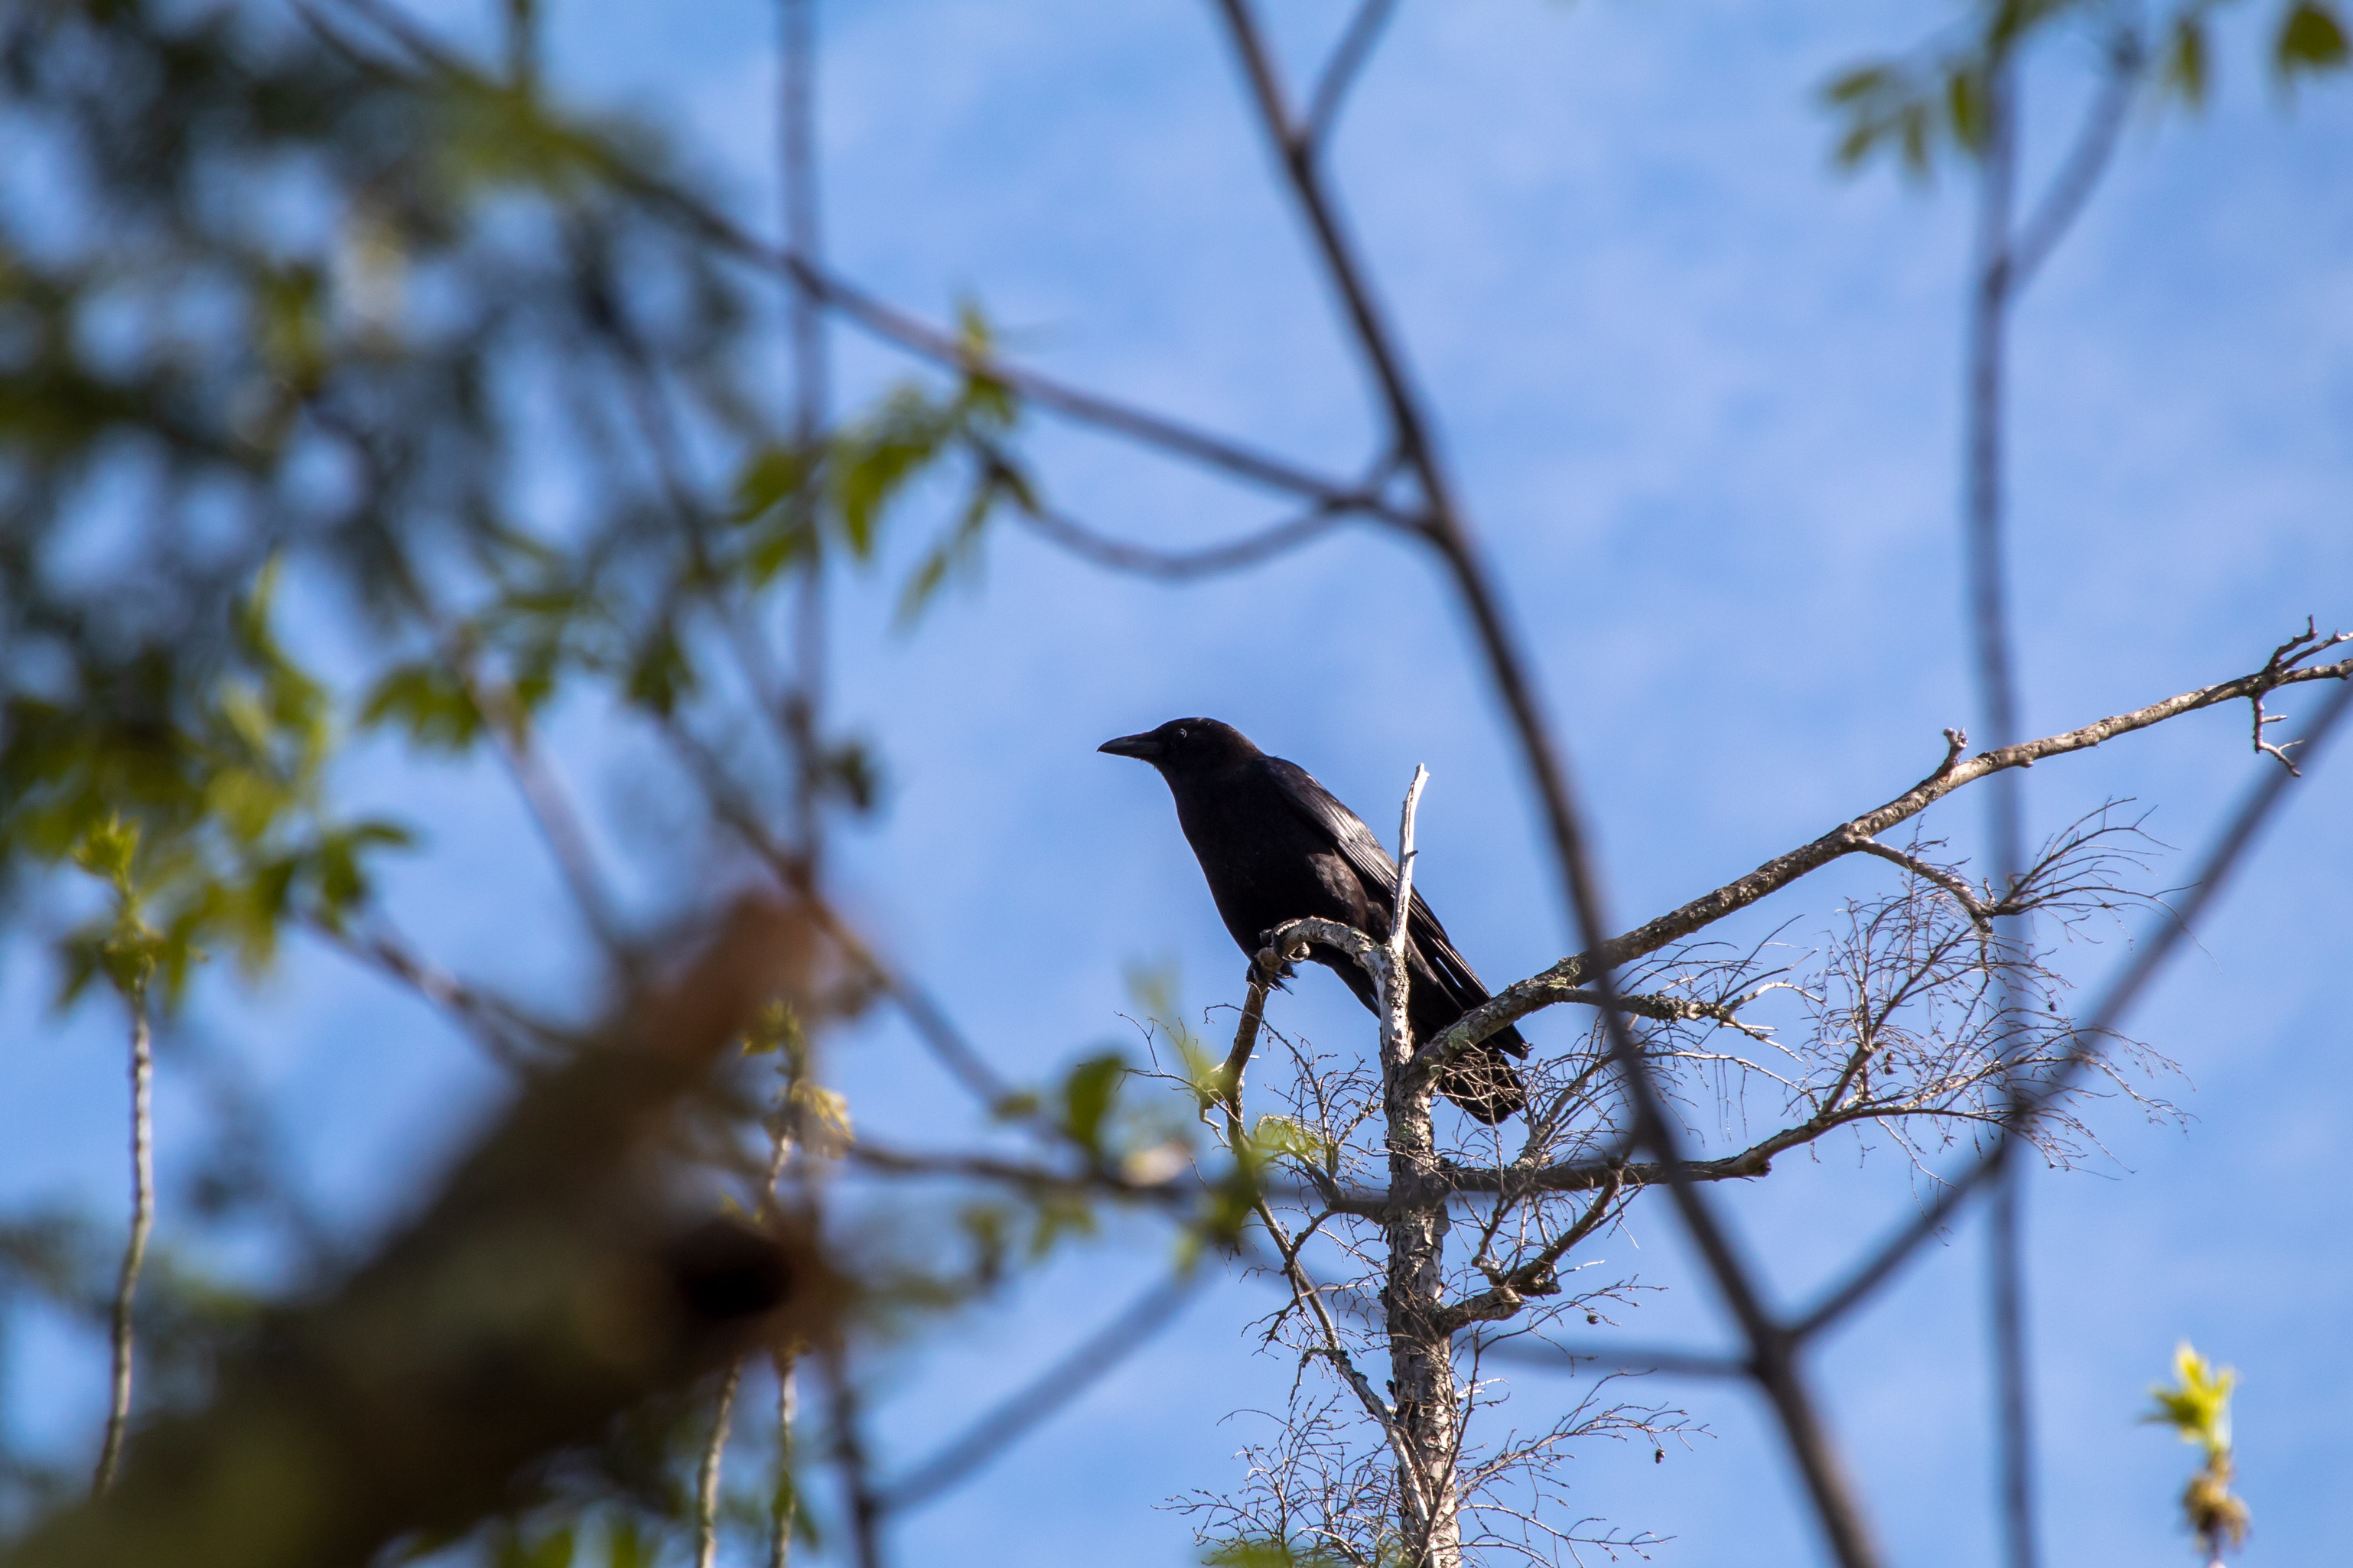 Black bird sitting on a branch in a tree canopy